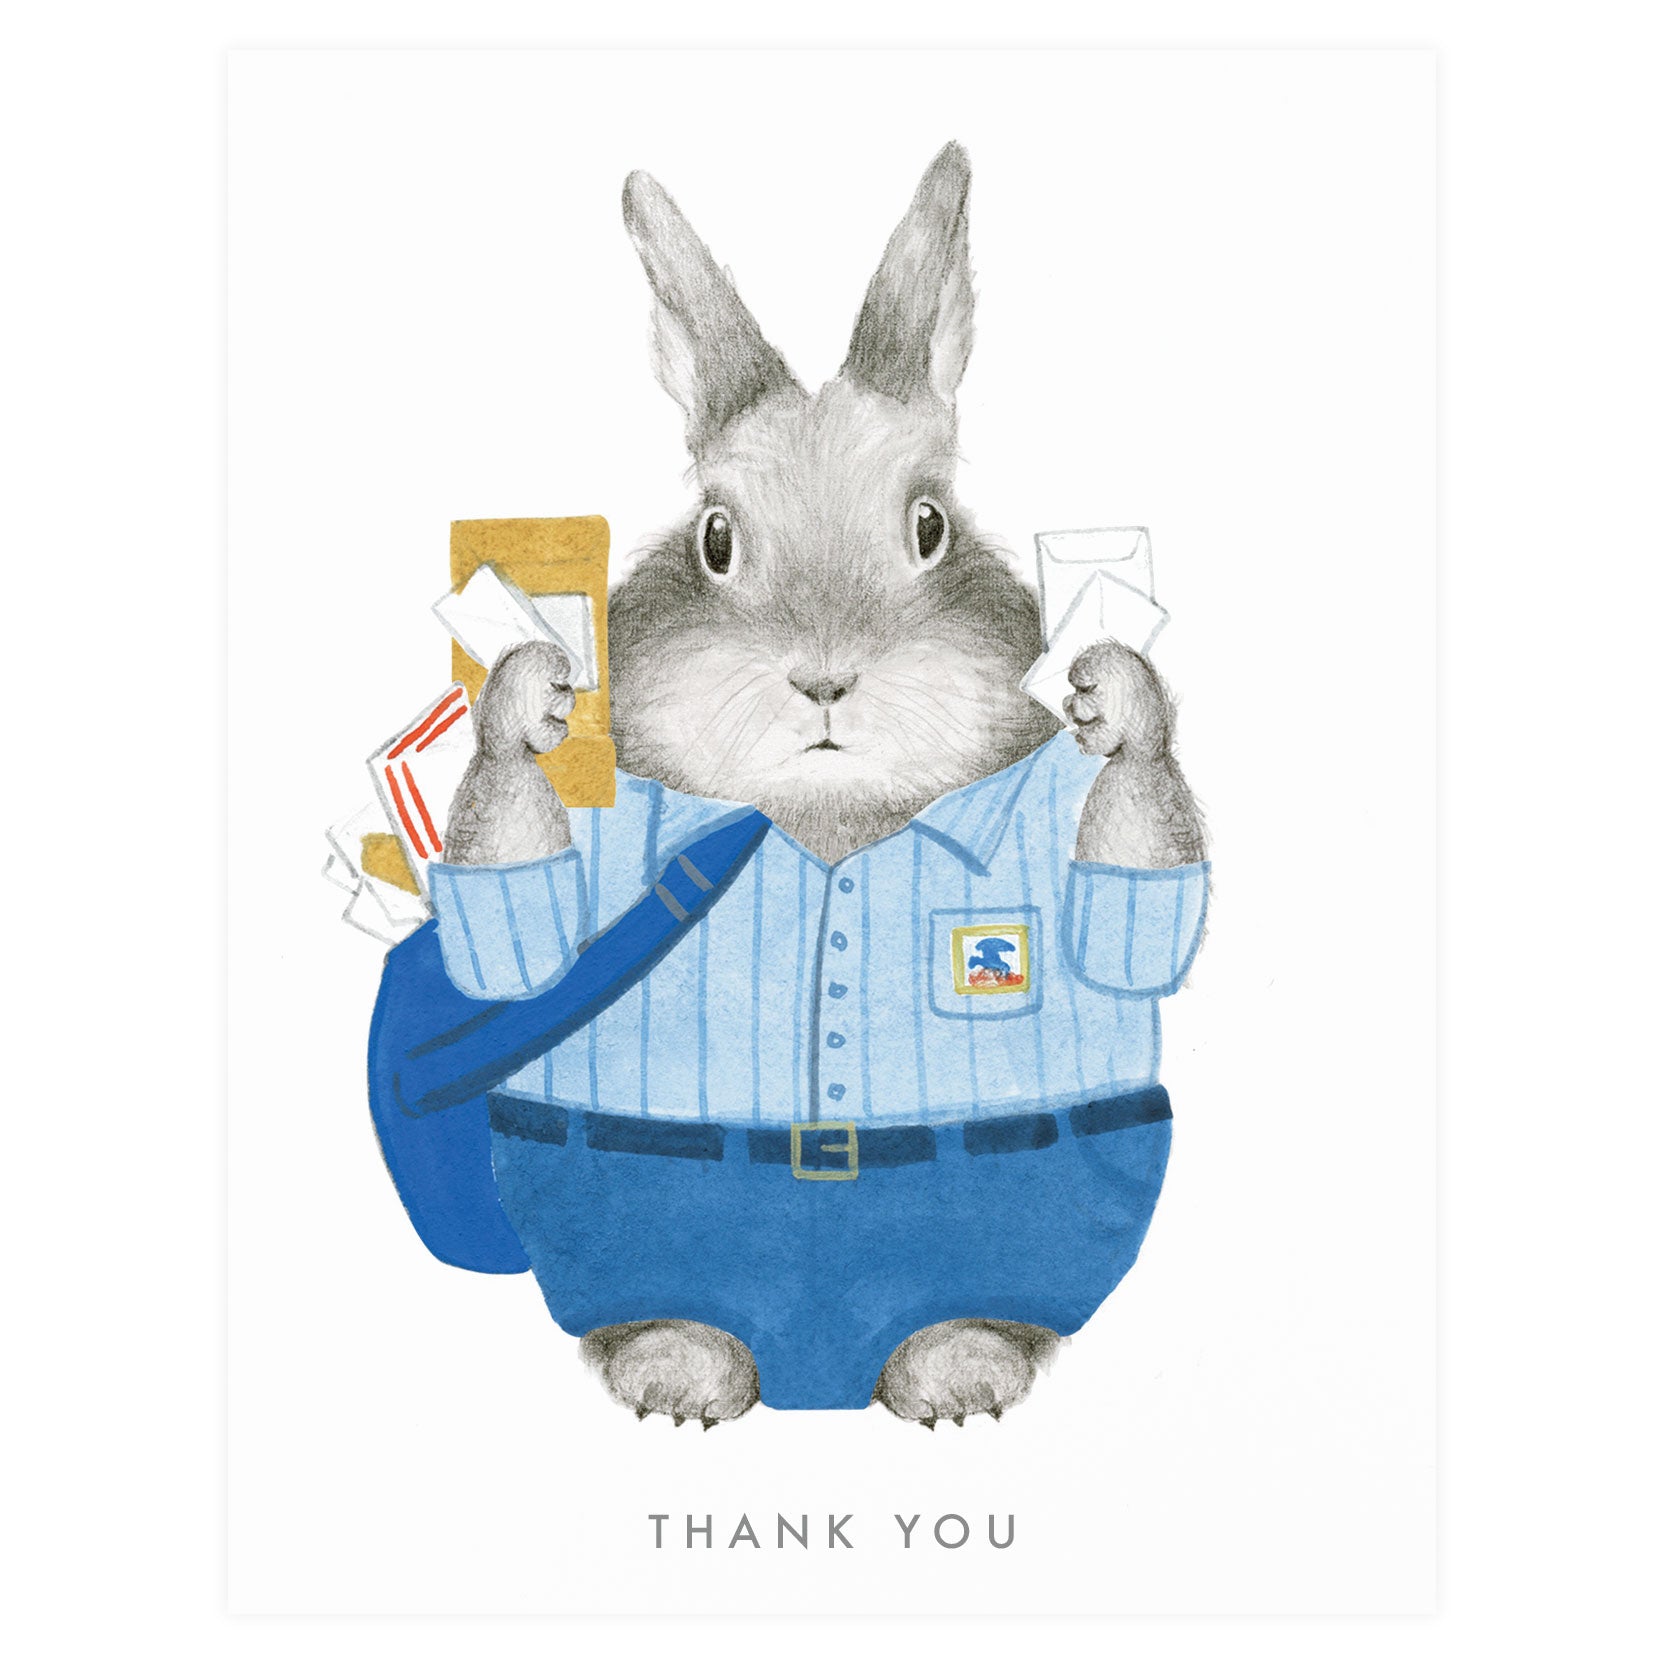 Essential Worker USPS Thank You Card